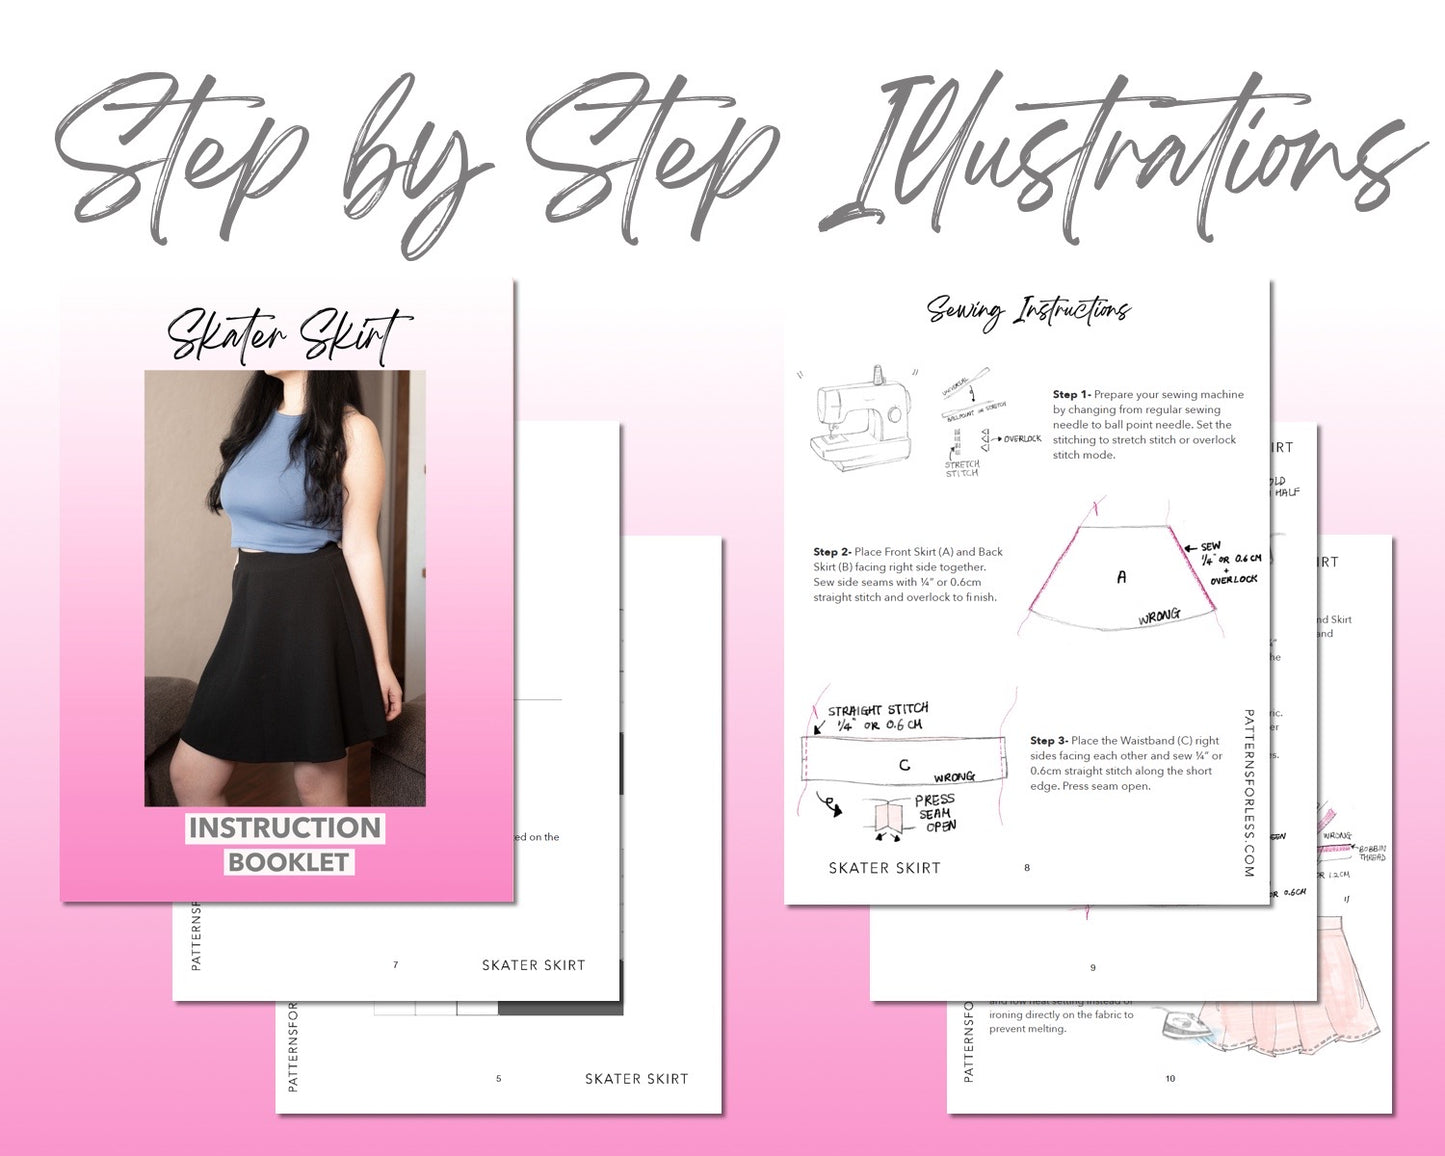 Skater Knit Skirt sewing pattern step by step illustrations.